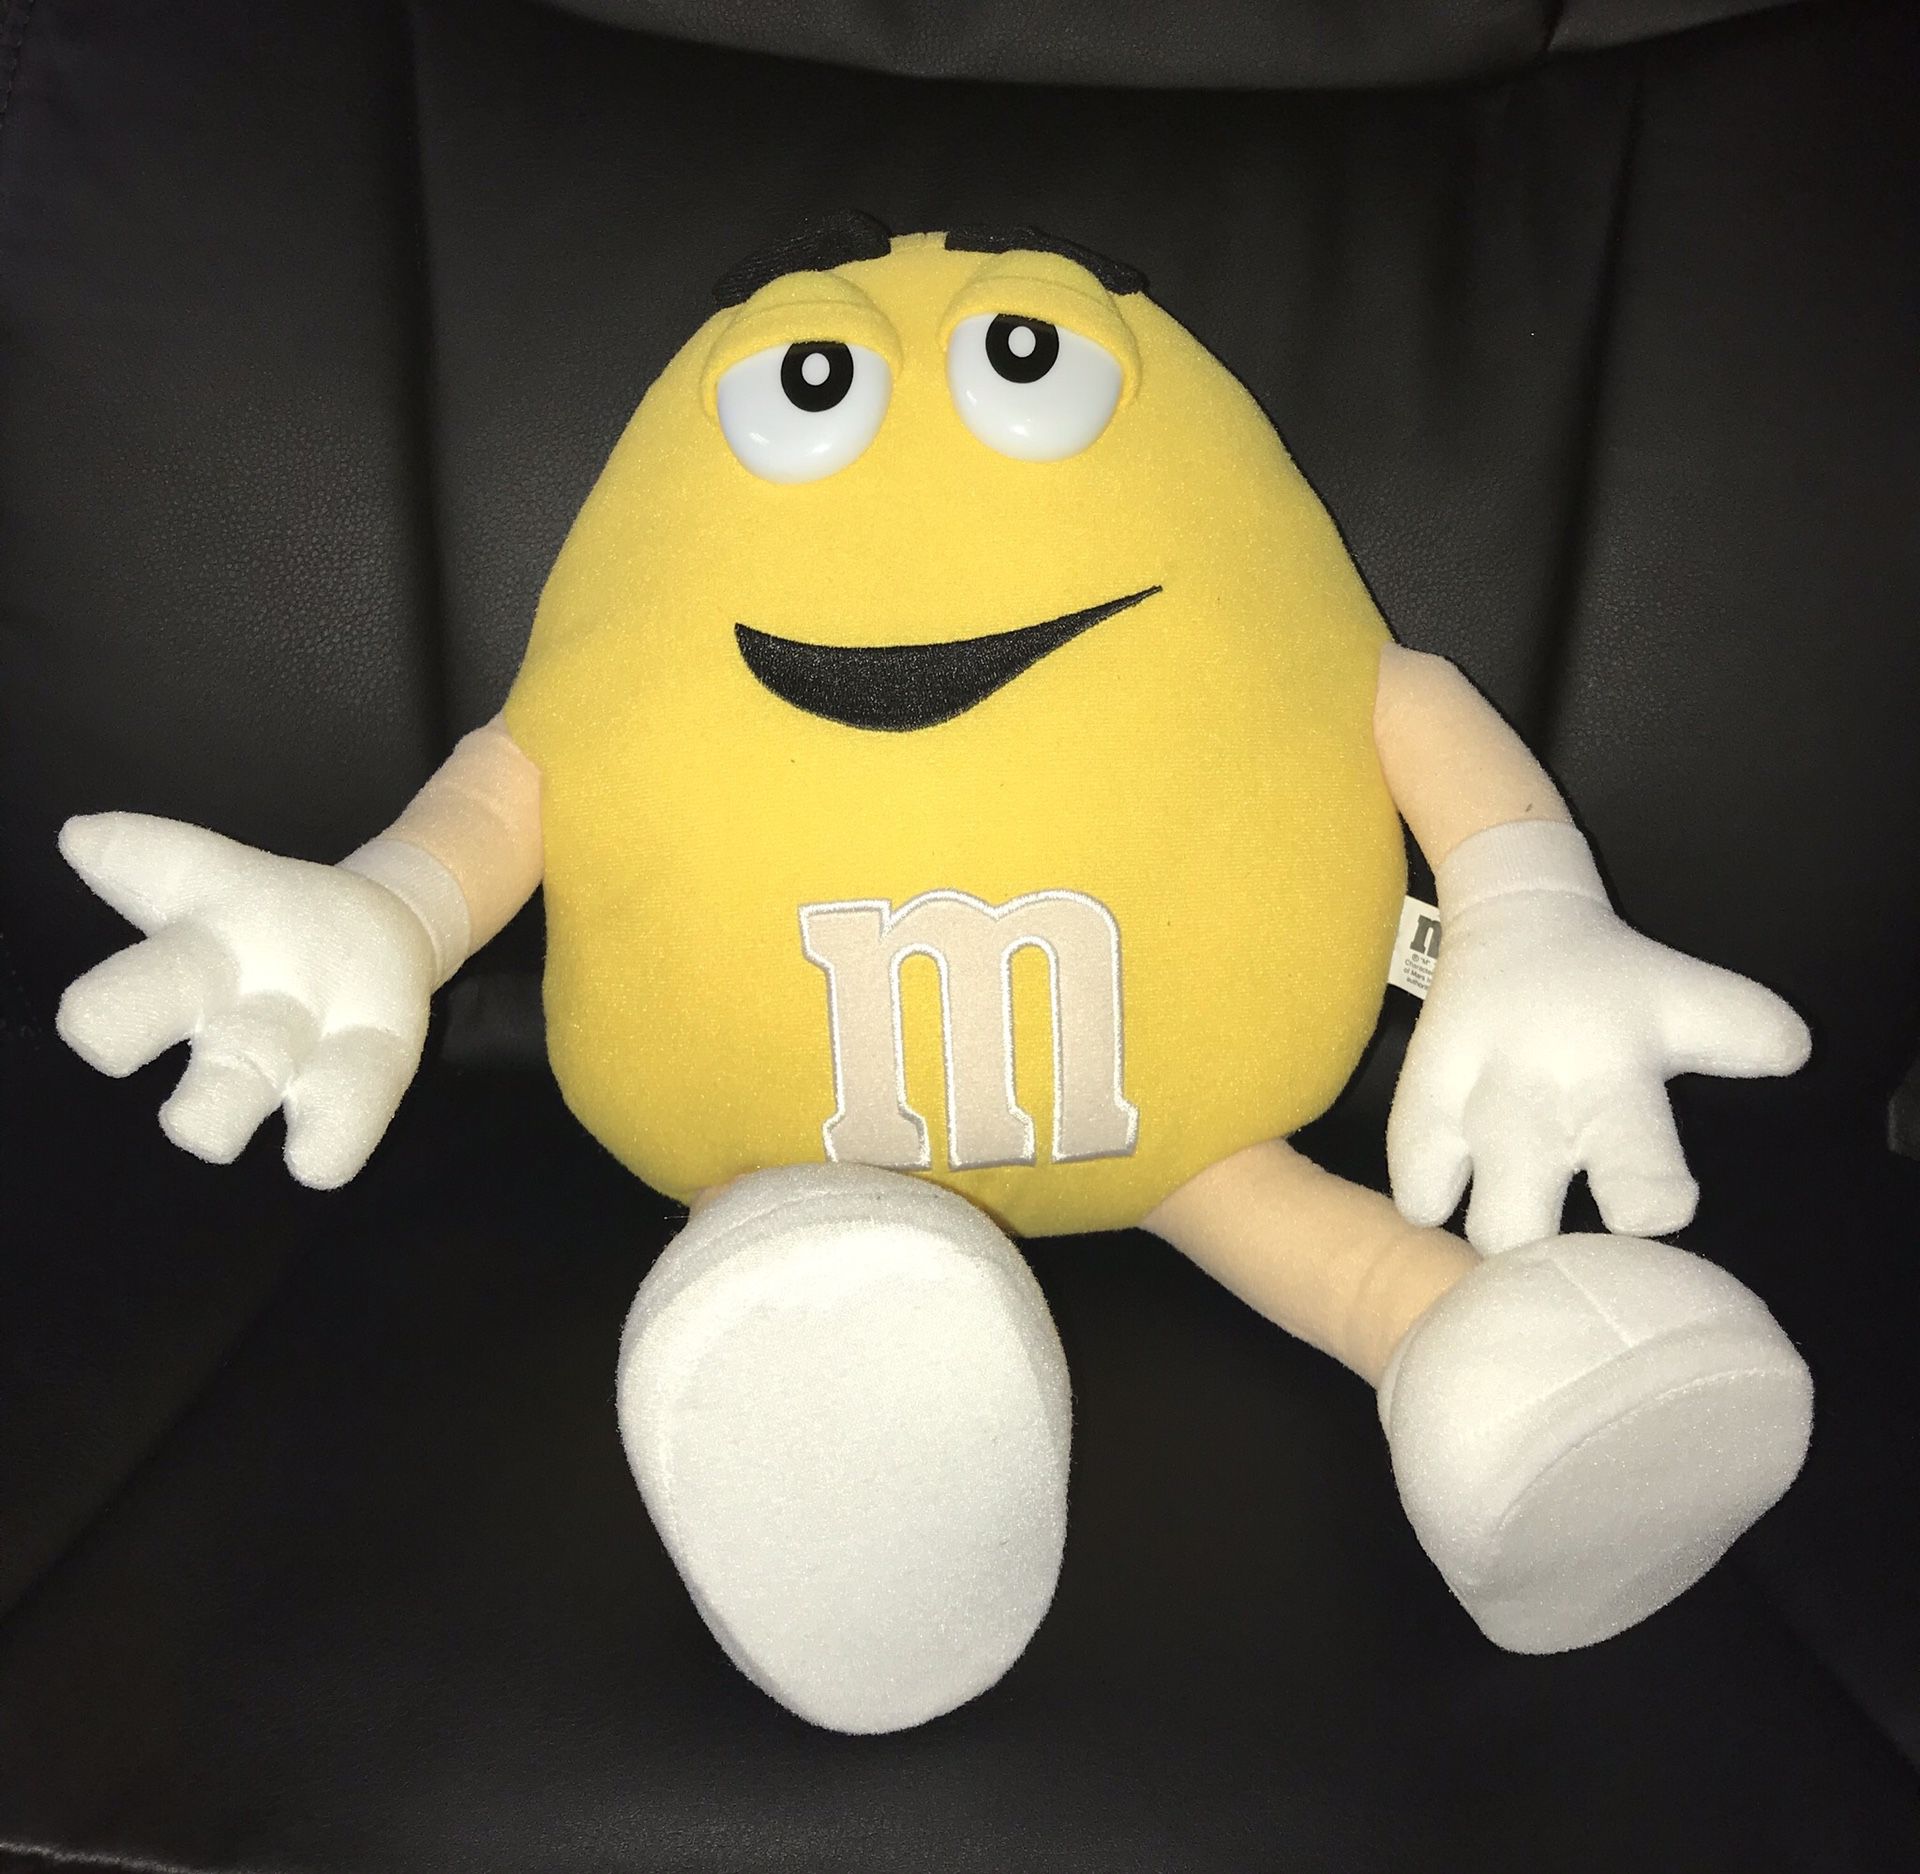 M&M VINTAGE STUFFED PLUSH YELLOW COLLECTION COLLECTIBLE CHARACTER TOY M AND M GIFT FOR BOY GIRL FUNNY SOFT